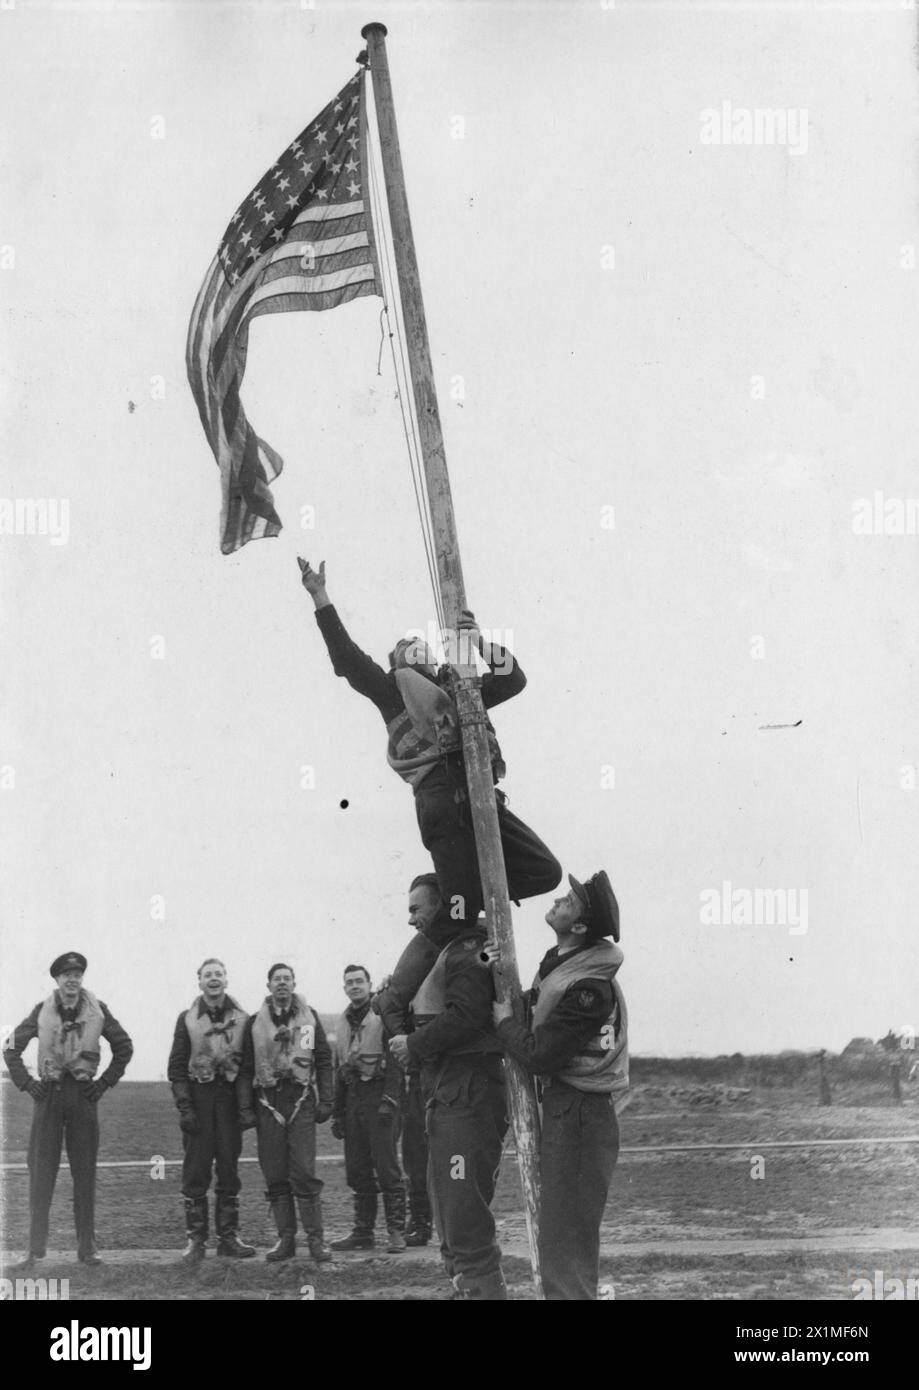 UNITED STATES EIGHTH AIR FORCE IN BRITAIN, 1942-1945 - Pilot Officer Kenneth Le Roy Holder stands on the shoulders of Pilot Officer Donald William McLeod to reach out for an American flag flying from a flag pole. A group of American airmen look on. They wear the insignia of the RAF Eagle Squadrons, the forerunners of the squadrons of the 4th Fighter Group. Passed for publication on 27 November 1941.Printed caption on reverse: 'Pilot Officer Kenneth Le Roy Holder from Buena Park, California, stands on the shoulders of Pilot Officer Donald William McLeod from Blackstone, Massachusetts, to fix th Stock Photo